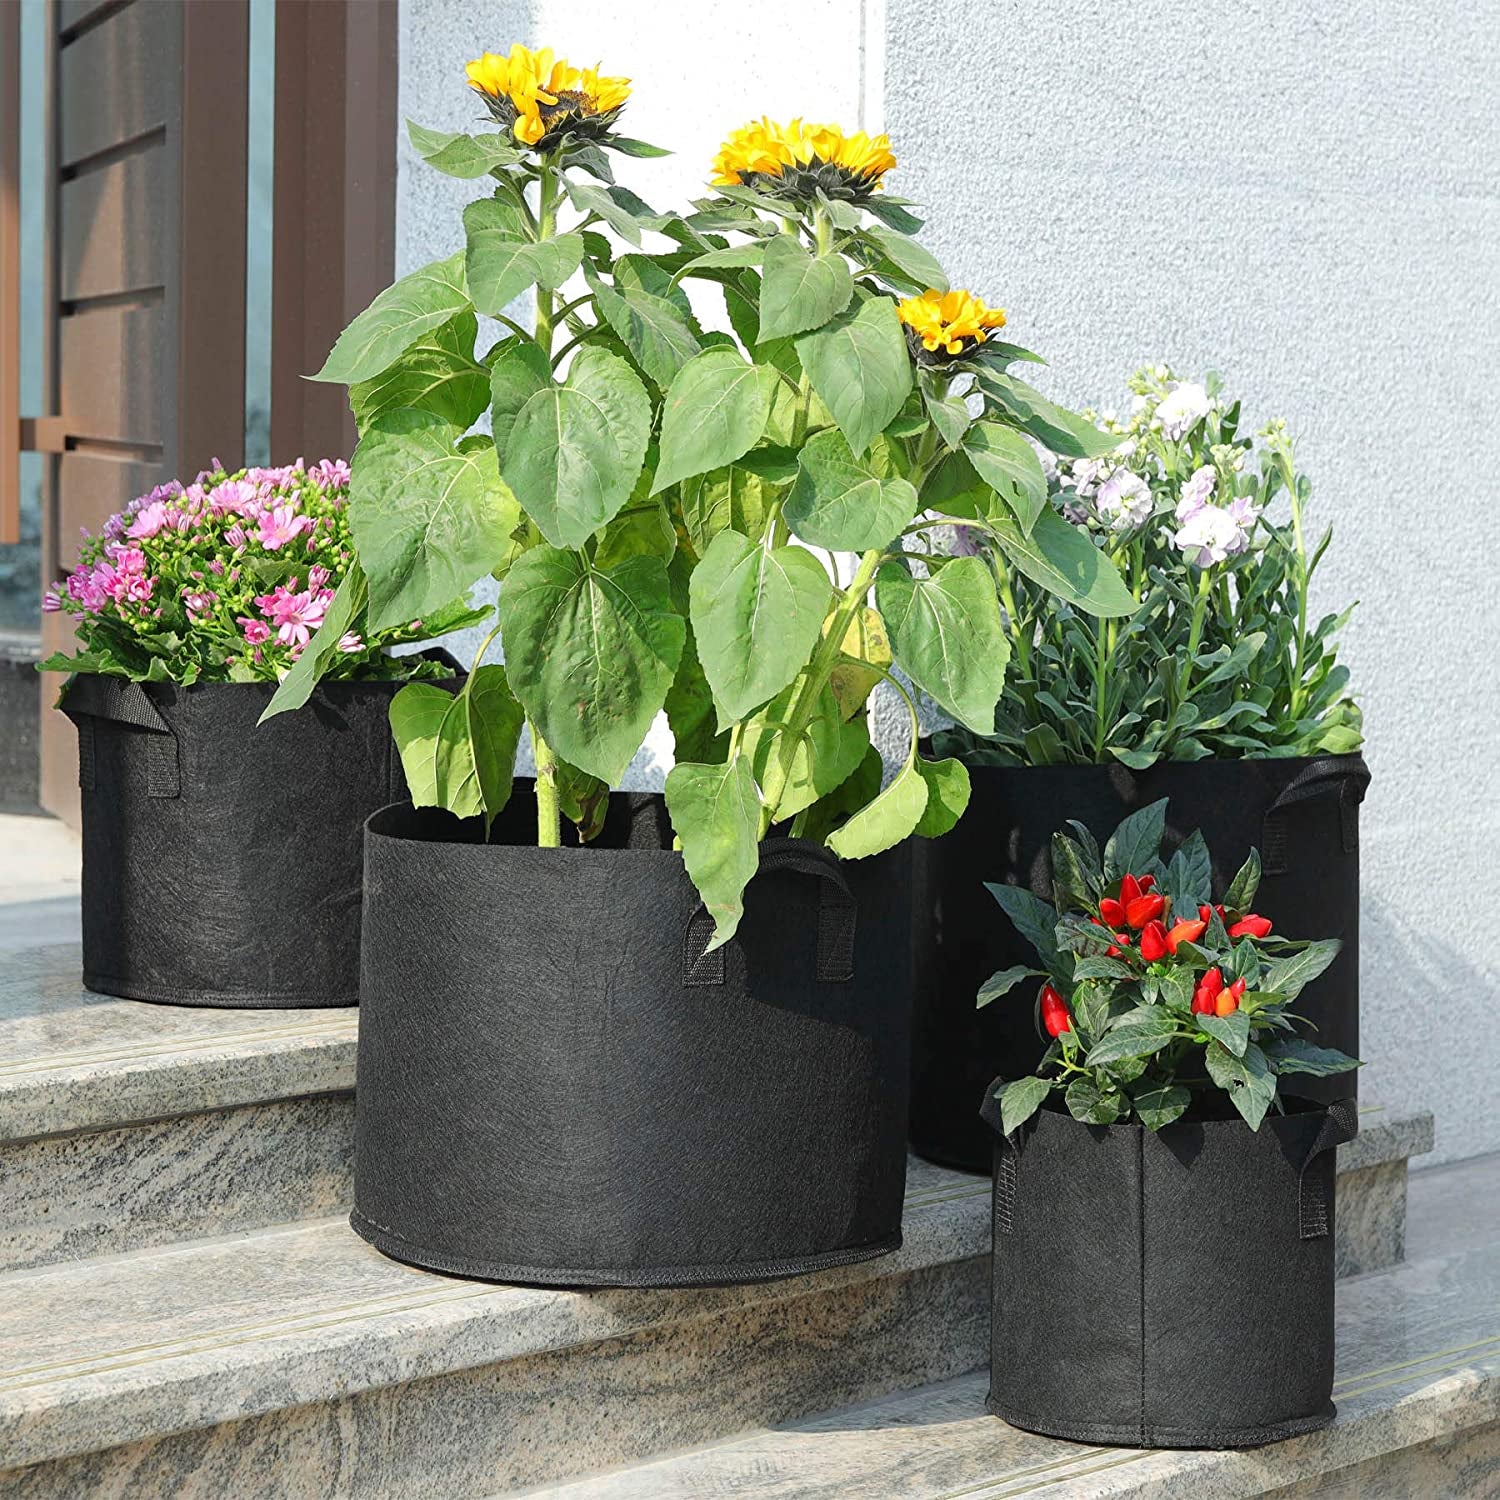 Fabric Plant Grow Bags with Handle 10 Gallon Pack of 5, Heavy Duty Nonwoven Smart Garden Pot Thickened Aeration Nursery Container Black for Outdoor Flower and Vegetables